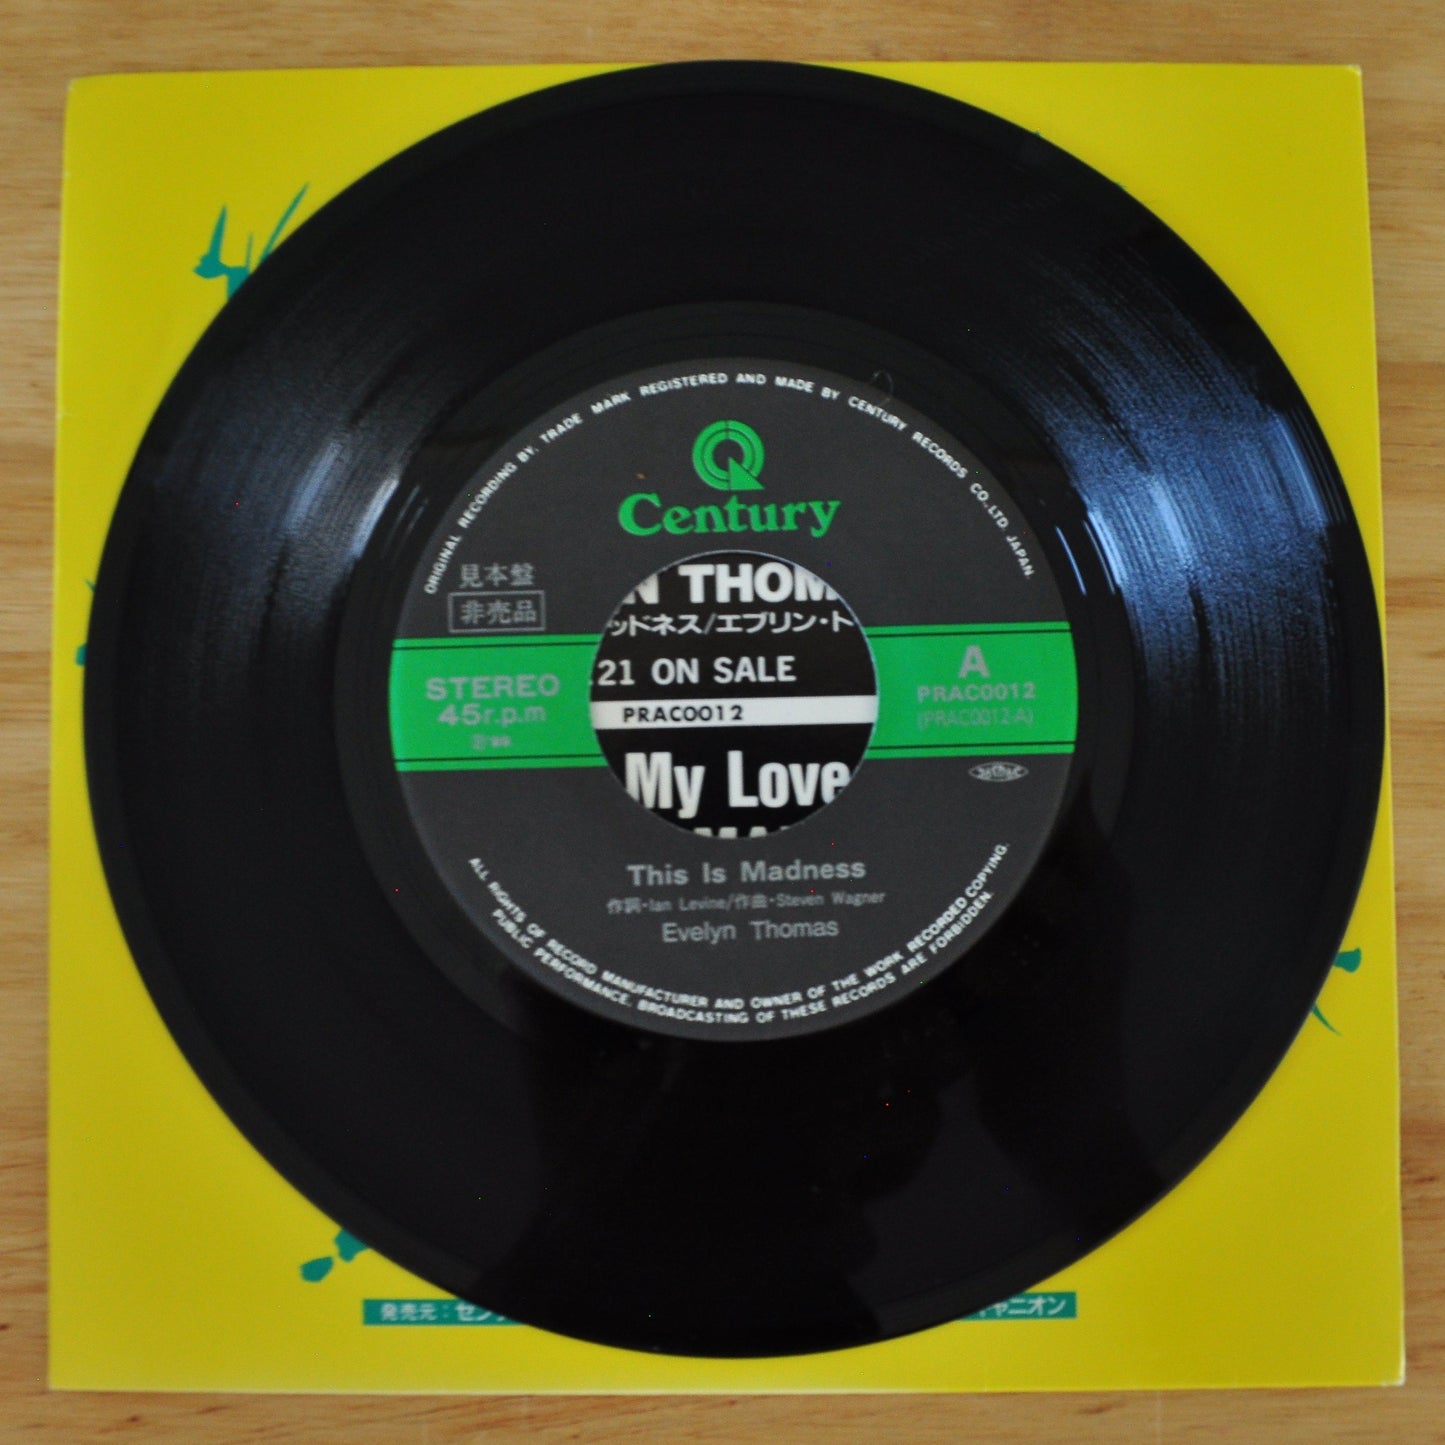 Evelyn Thomas – This Is Madness / Try my love - 7" Promo